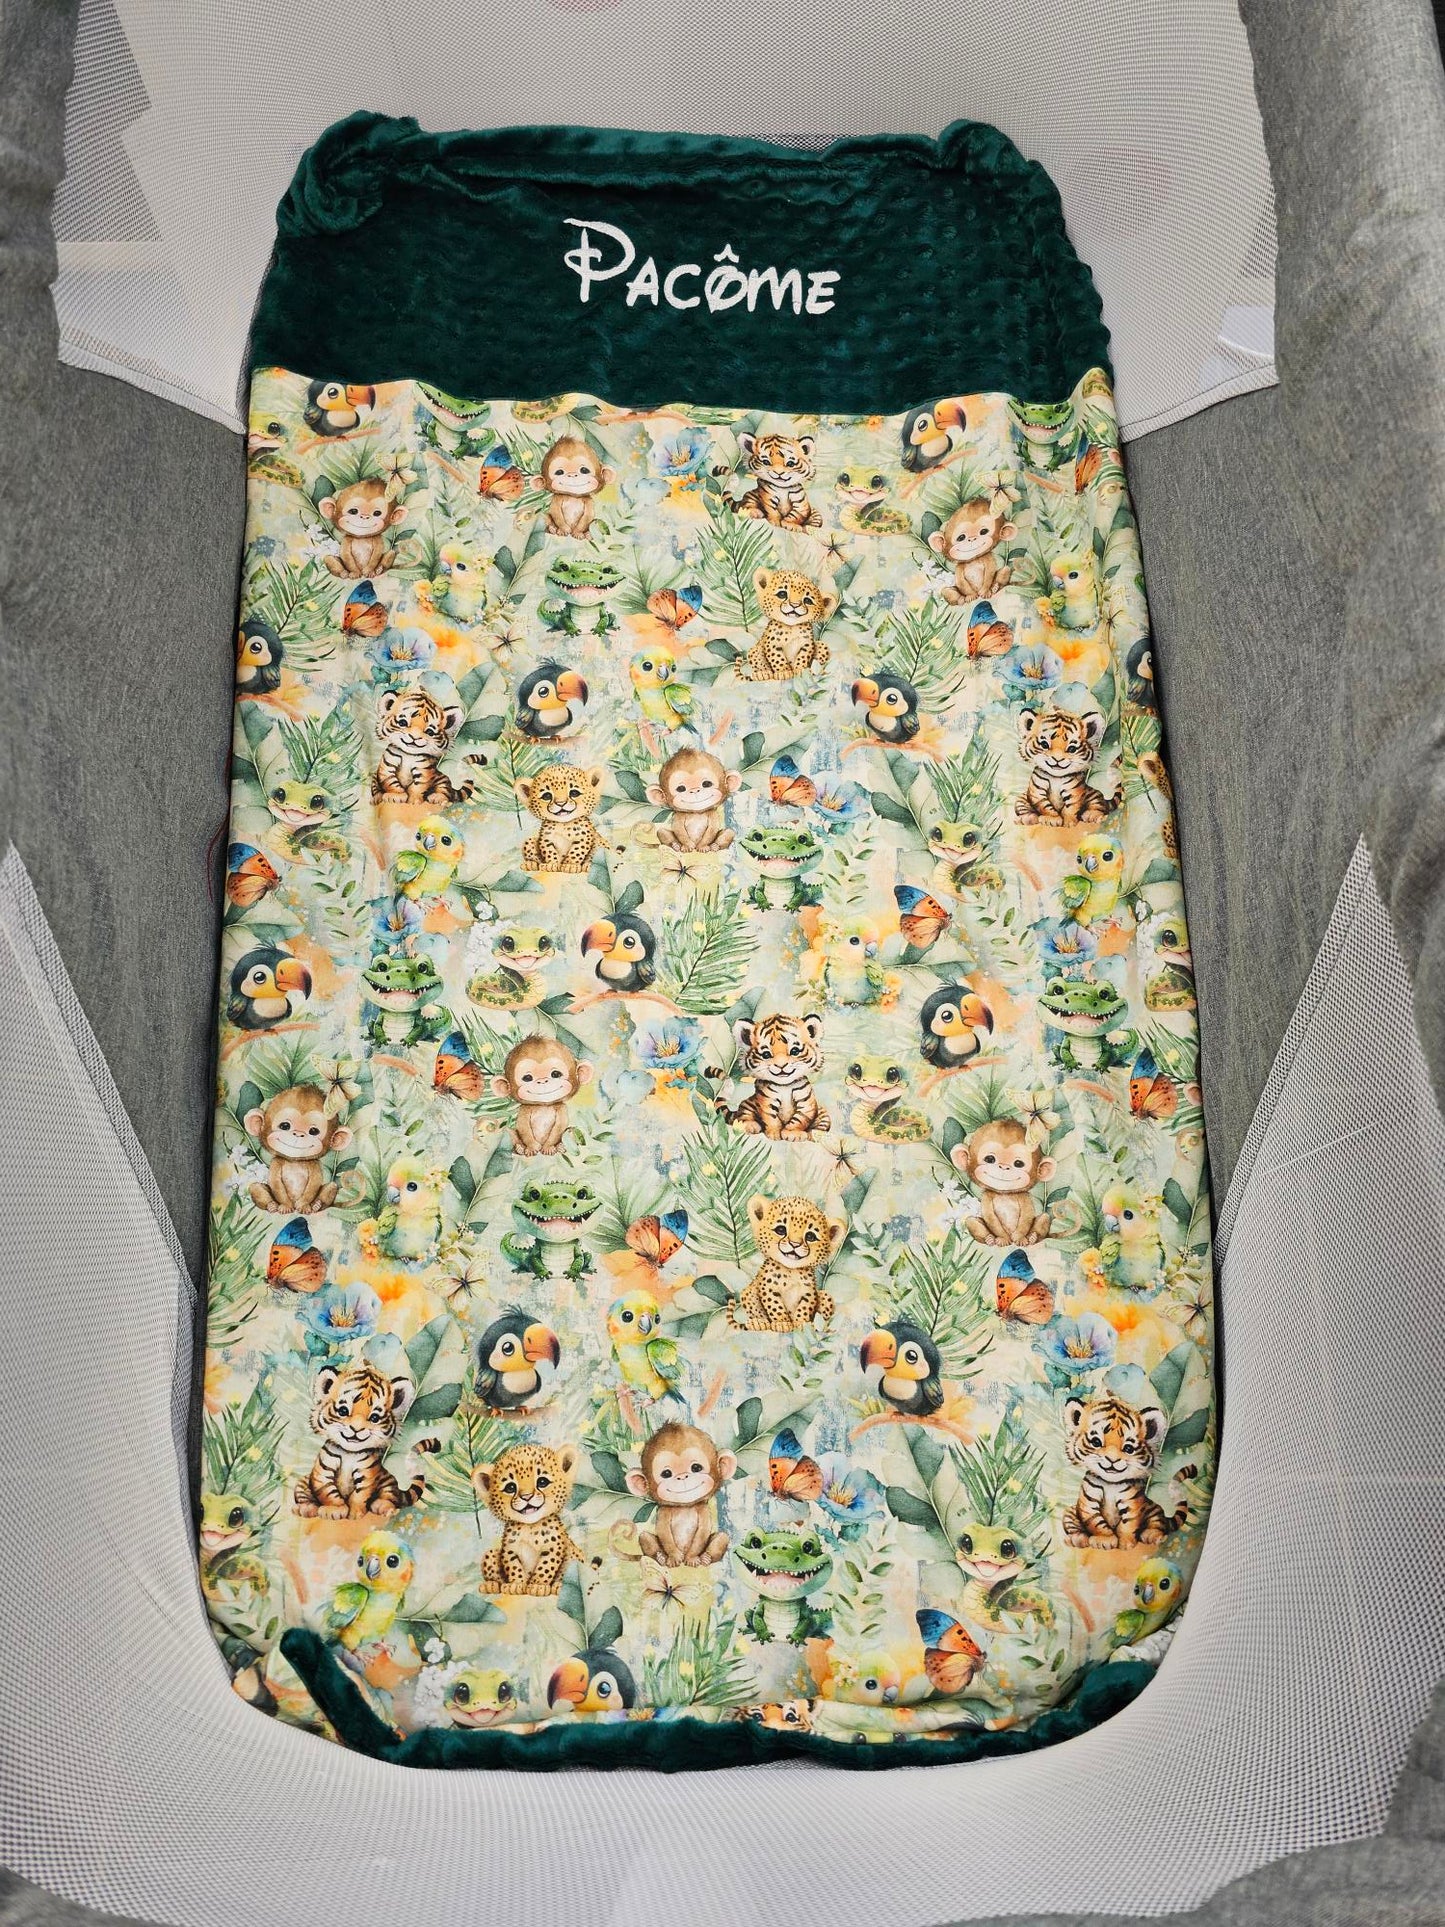 Personalized Boy Blanket 70cm x 95cm 0-3 years old - Calincaline.be